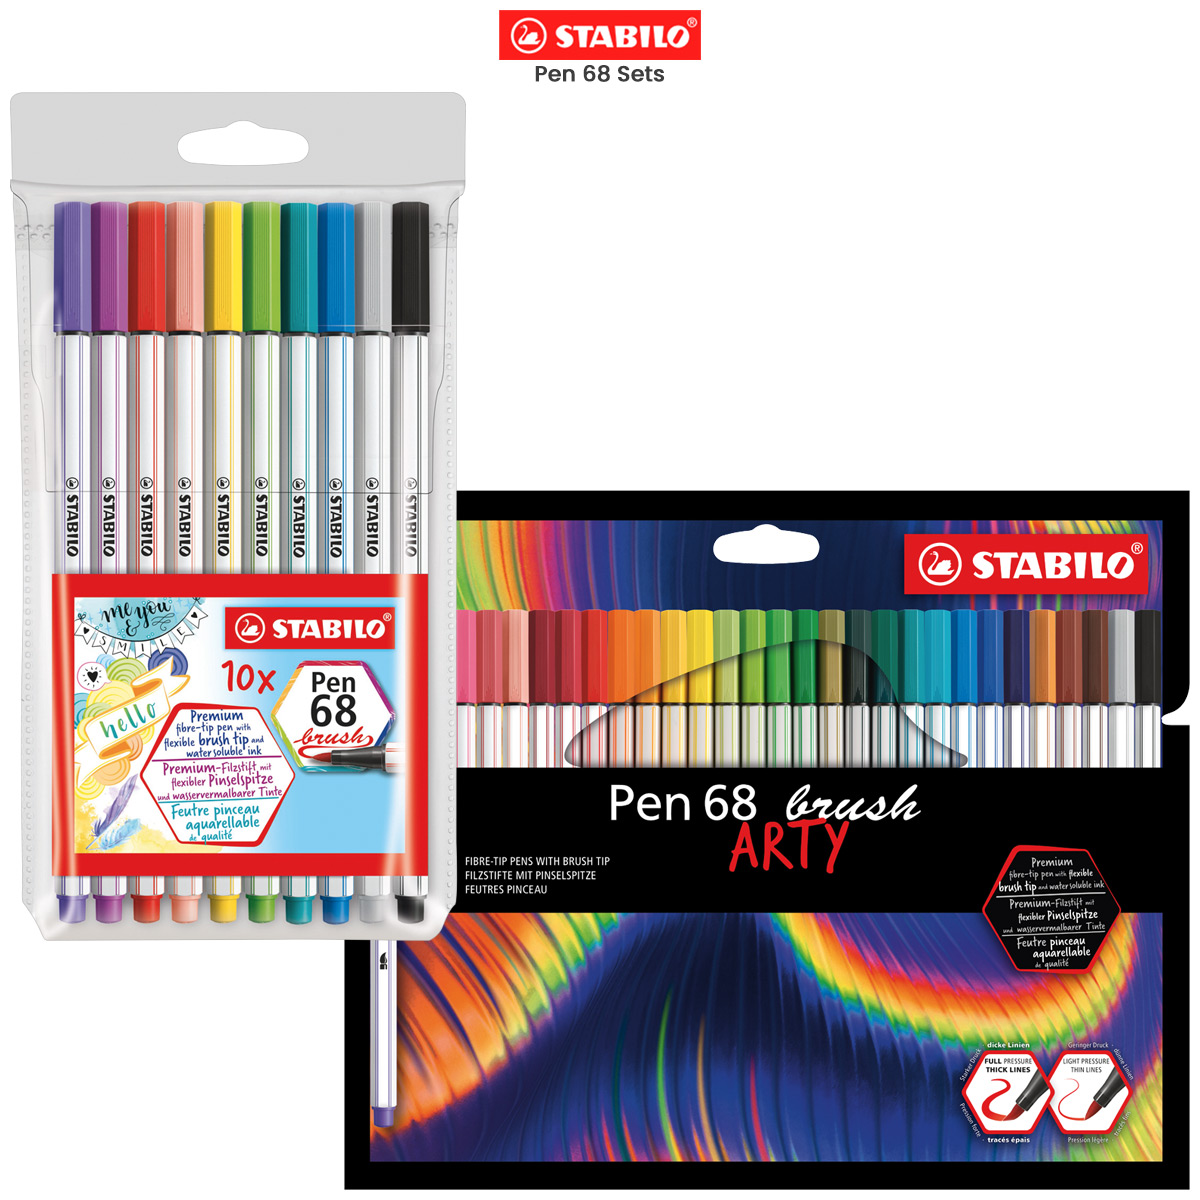 STABILO pointMax Writing felt-tip pens, Pack of 8, Assorted Pastel Col